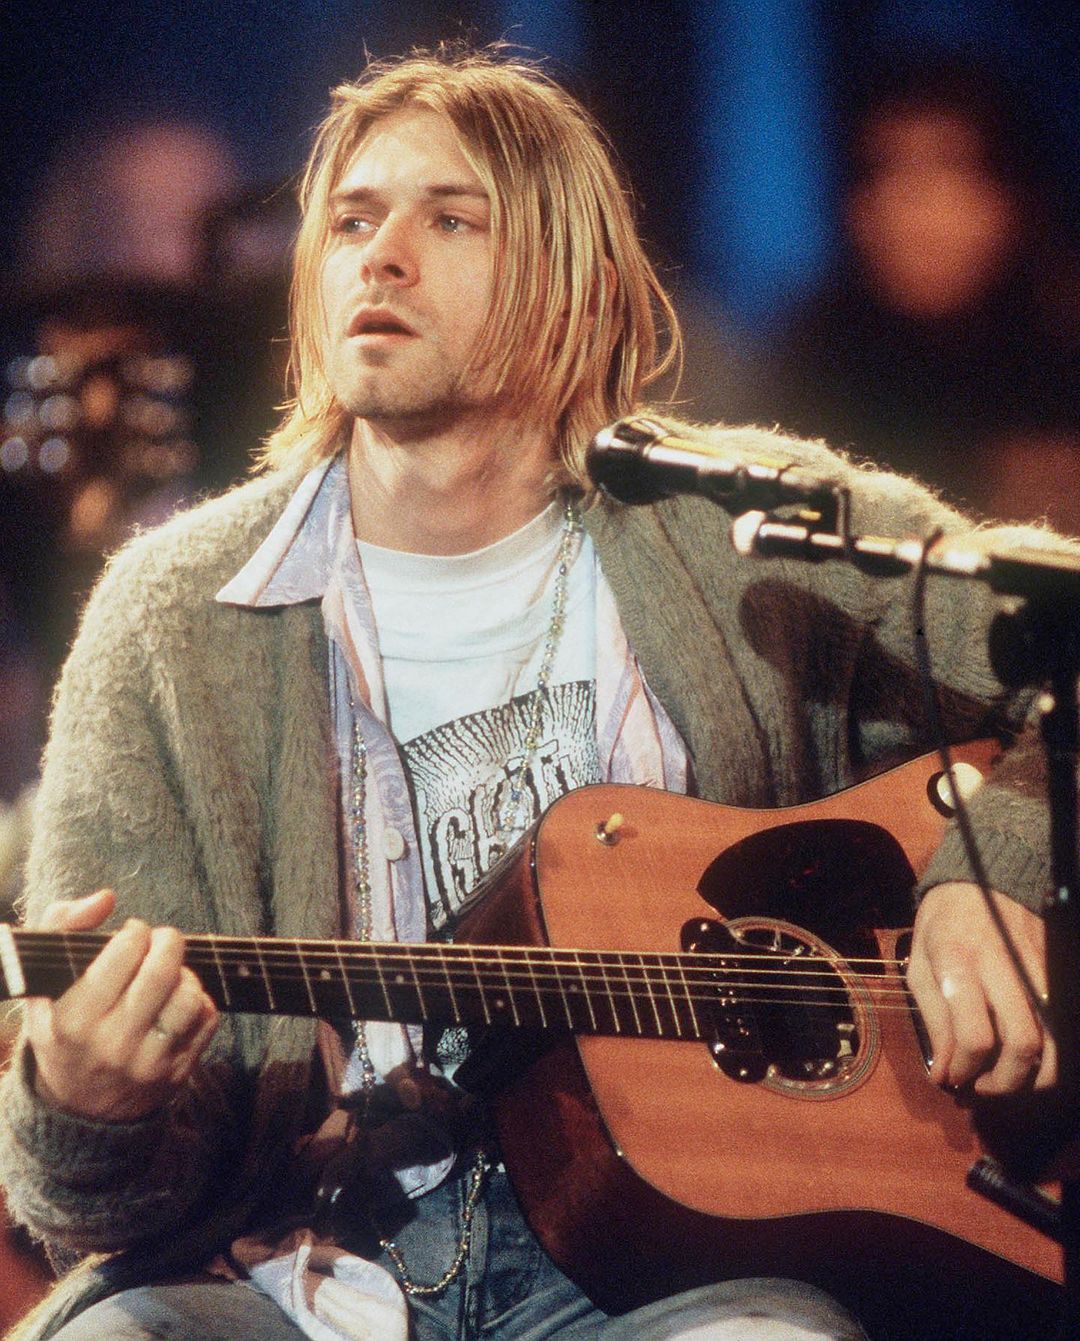 A look into Kurt Cobain’s infamous style